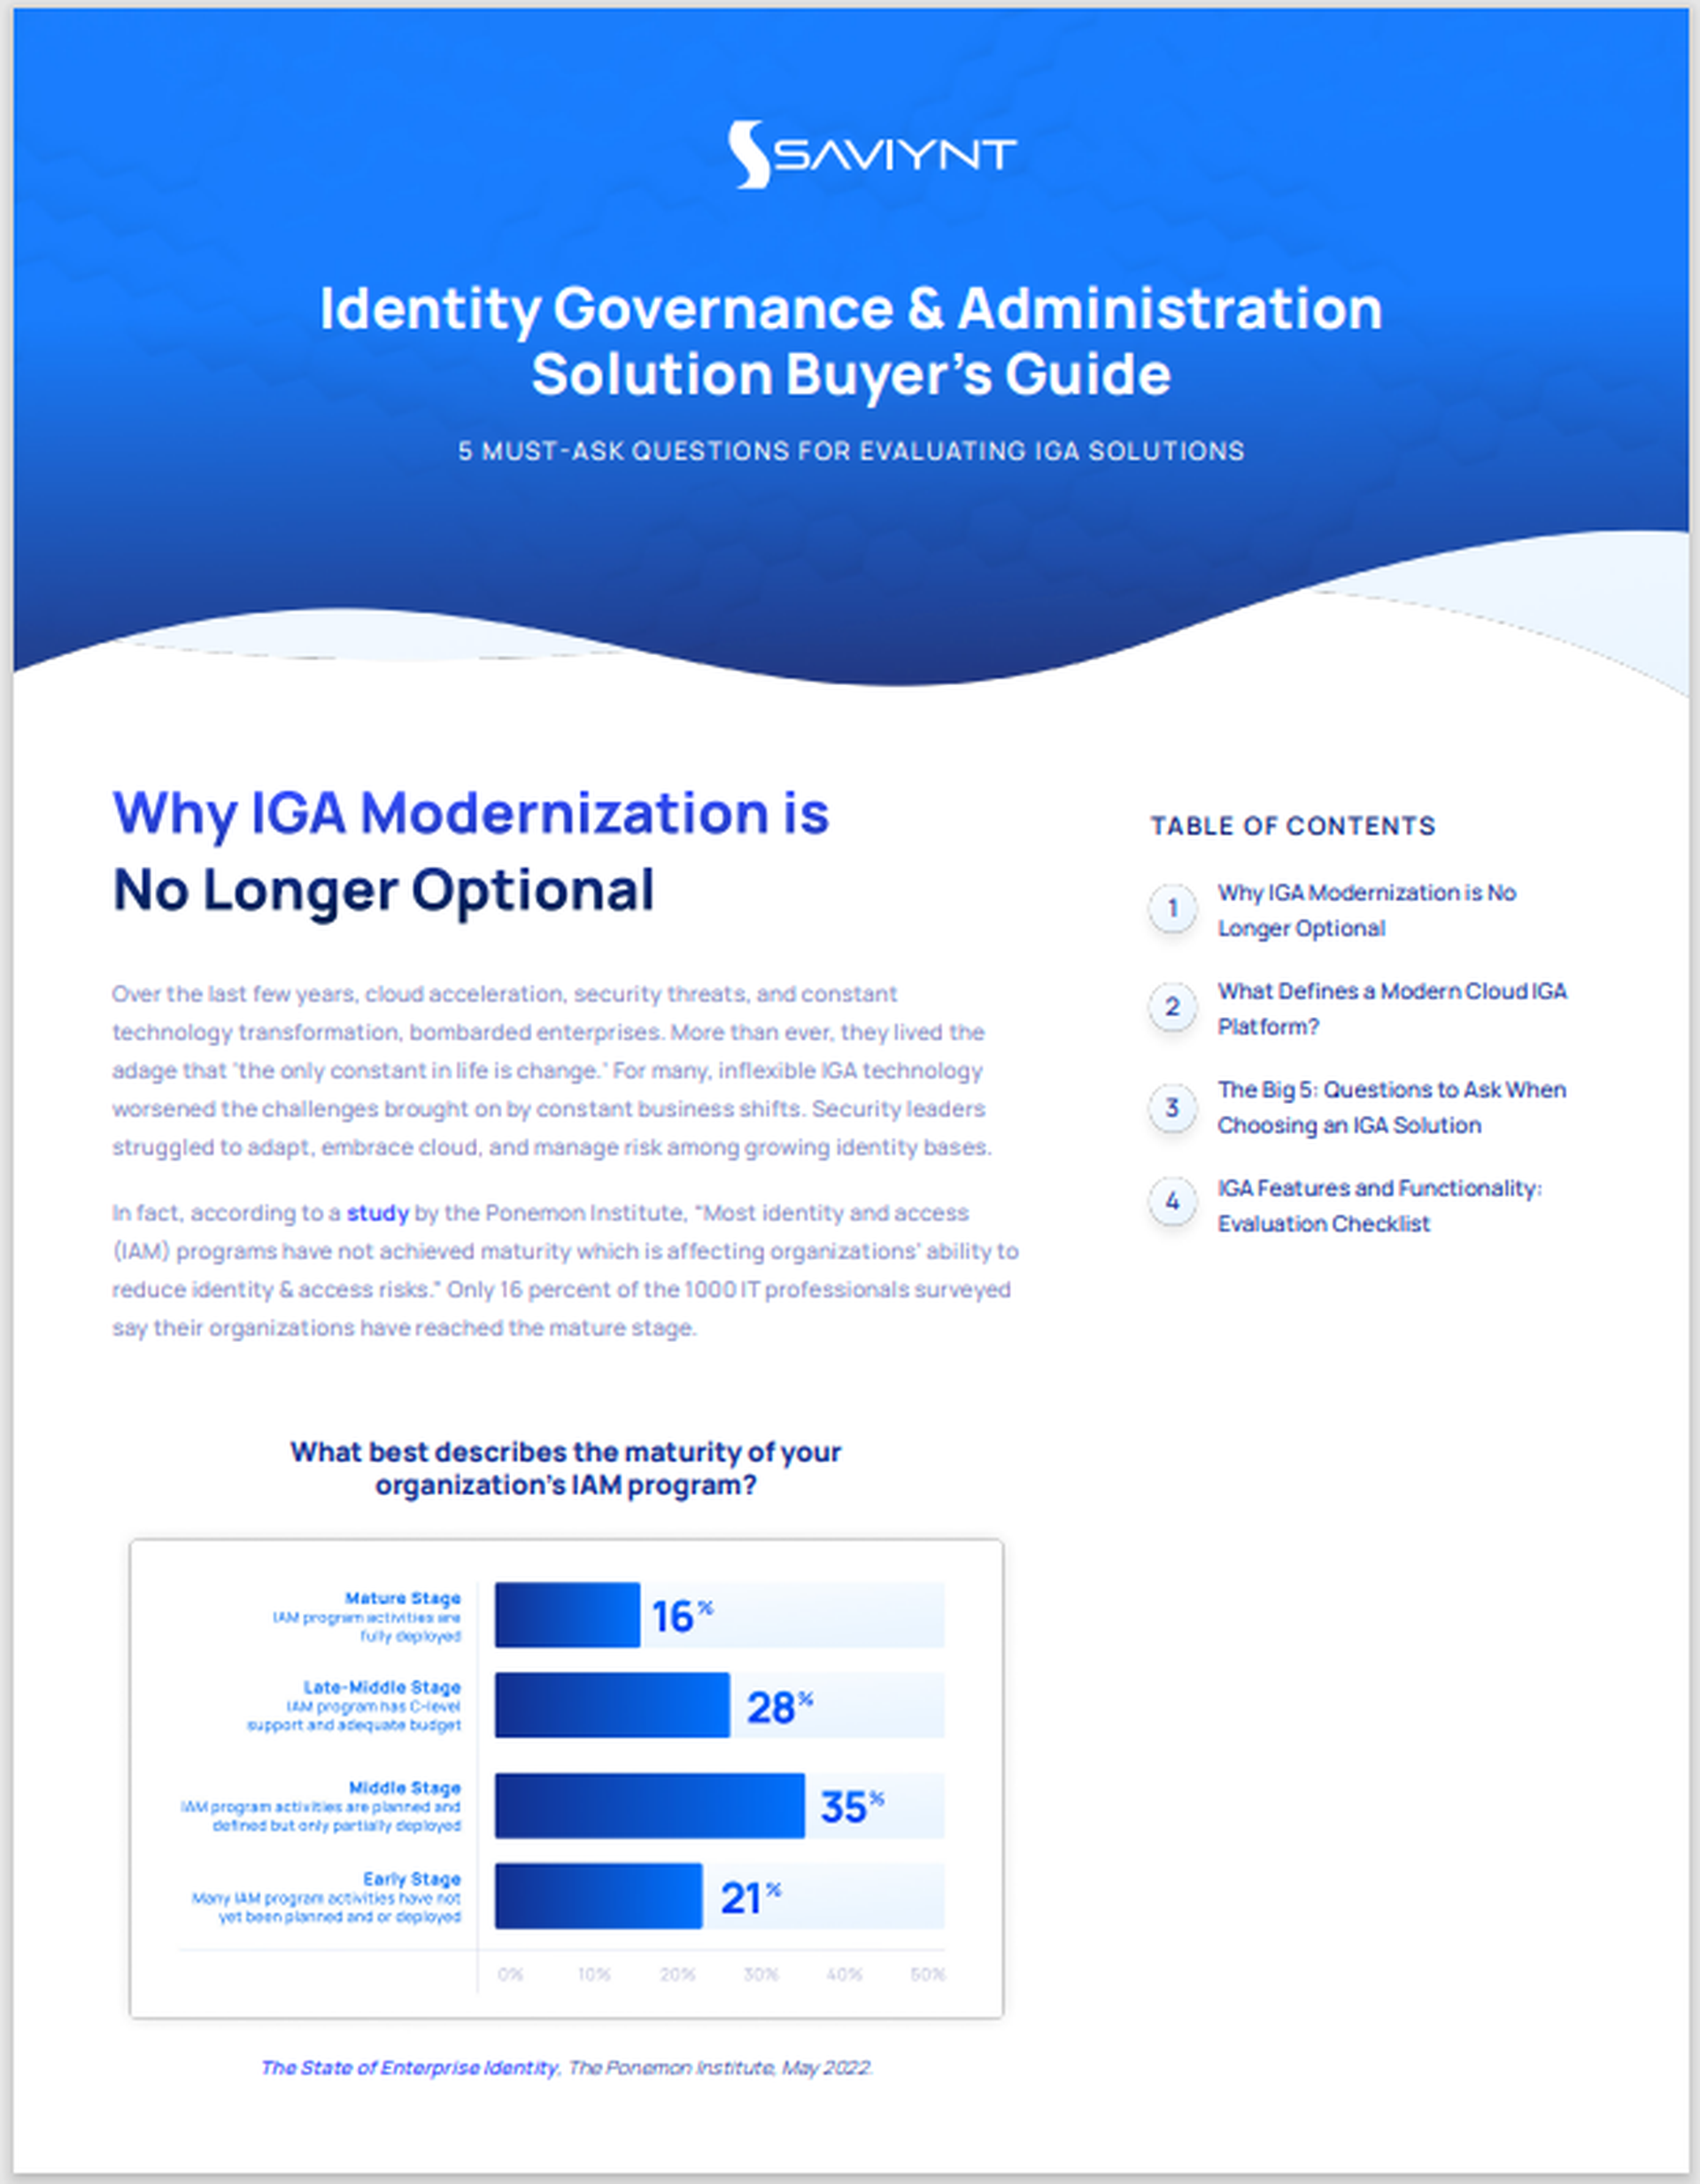 Identity Governance & Administration Solution Buyer’s Guide